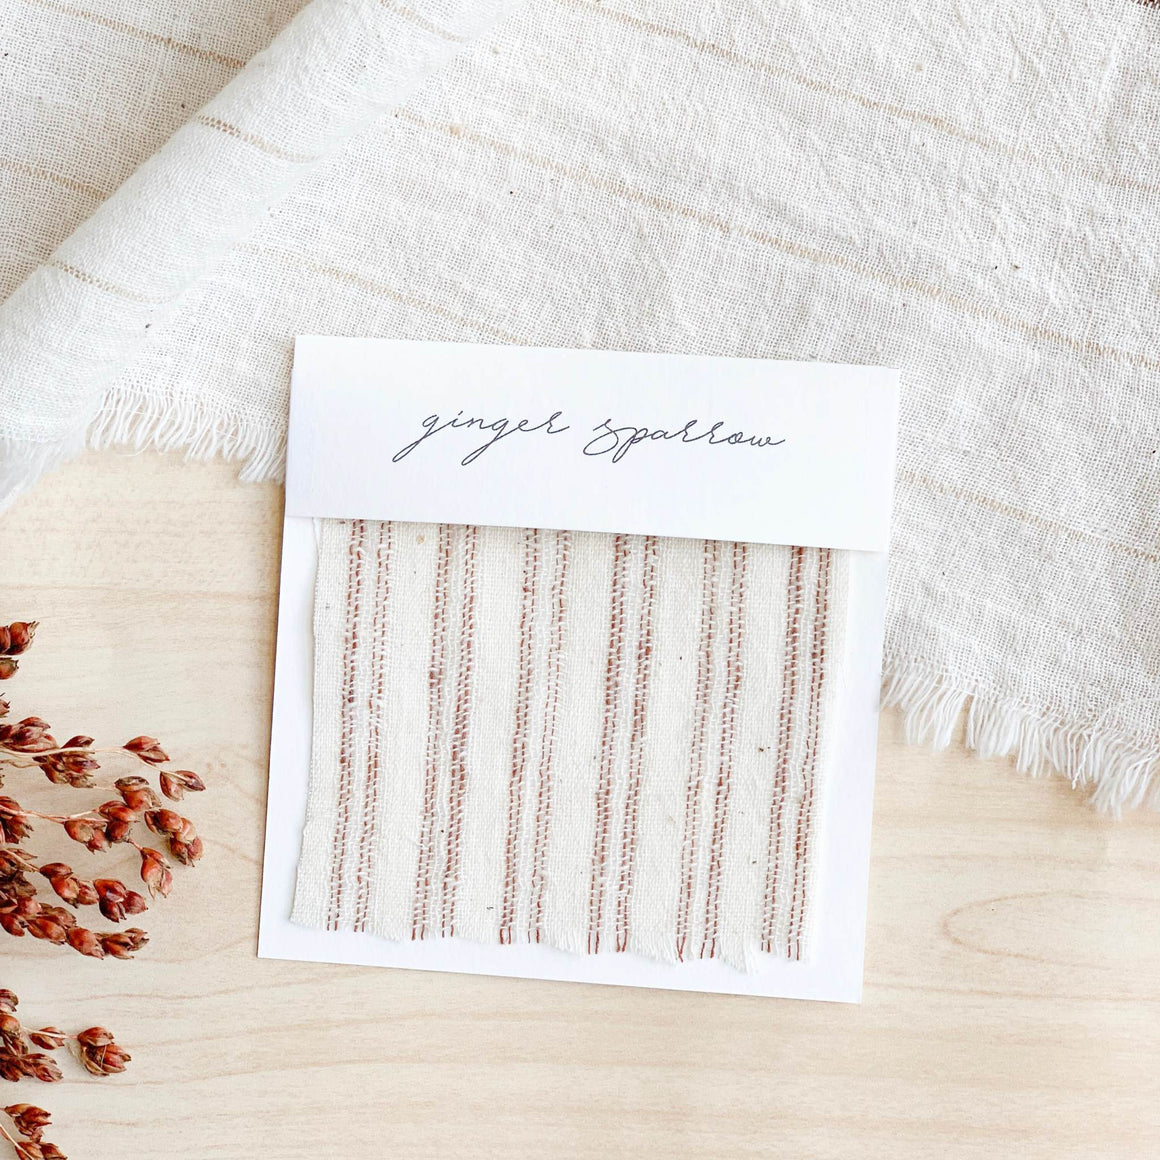 Handwoven cotton textile by Ginger Sparrow, a modern home decor brand. Featuring rugged stripes in earthy terracotta on a soft ivory ground. Light and airy its perfect for #throwpillows #drapes #livingroomdecor #bedroomideas